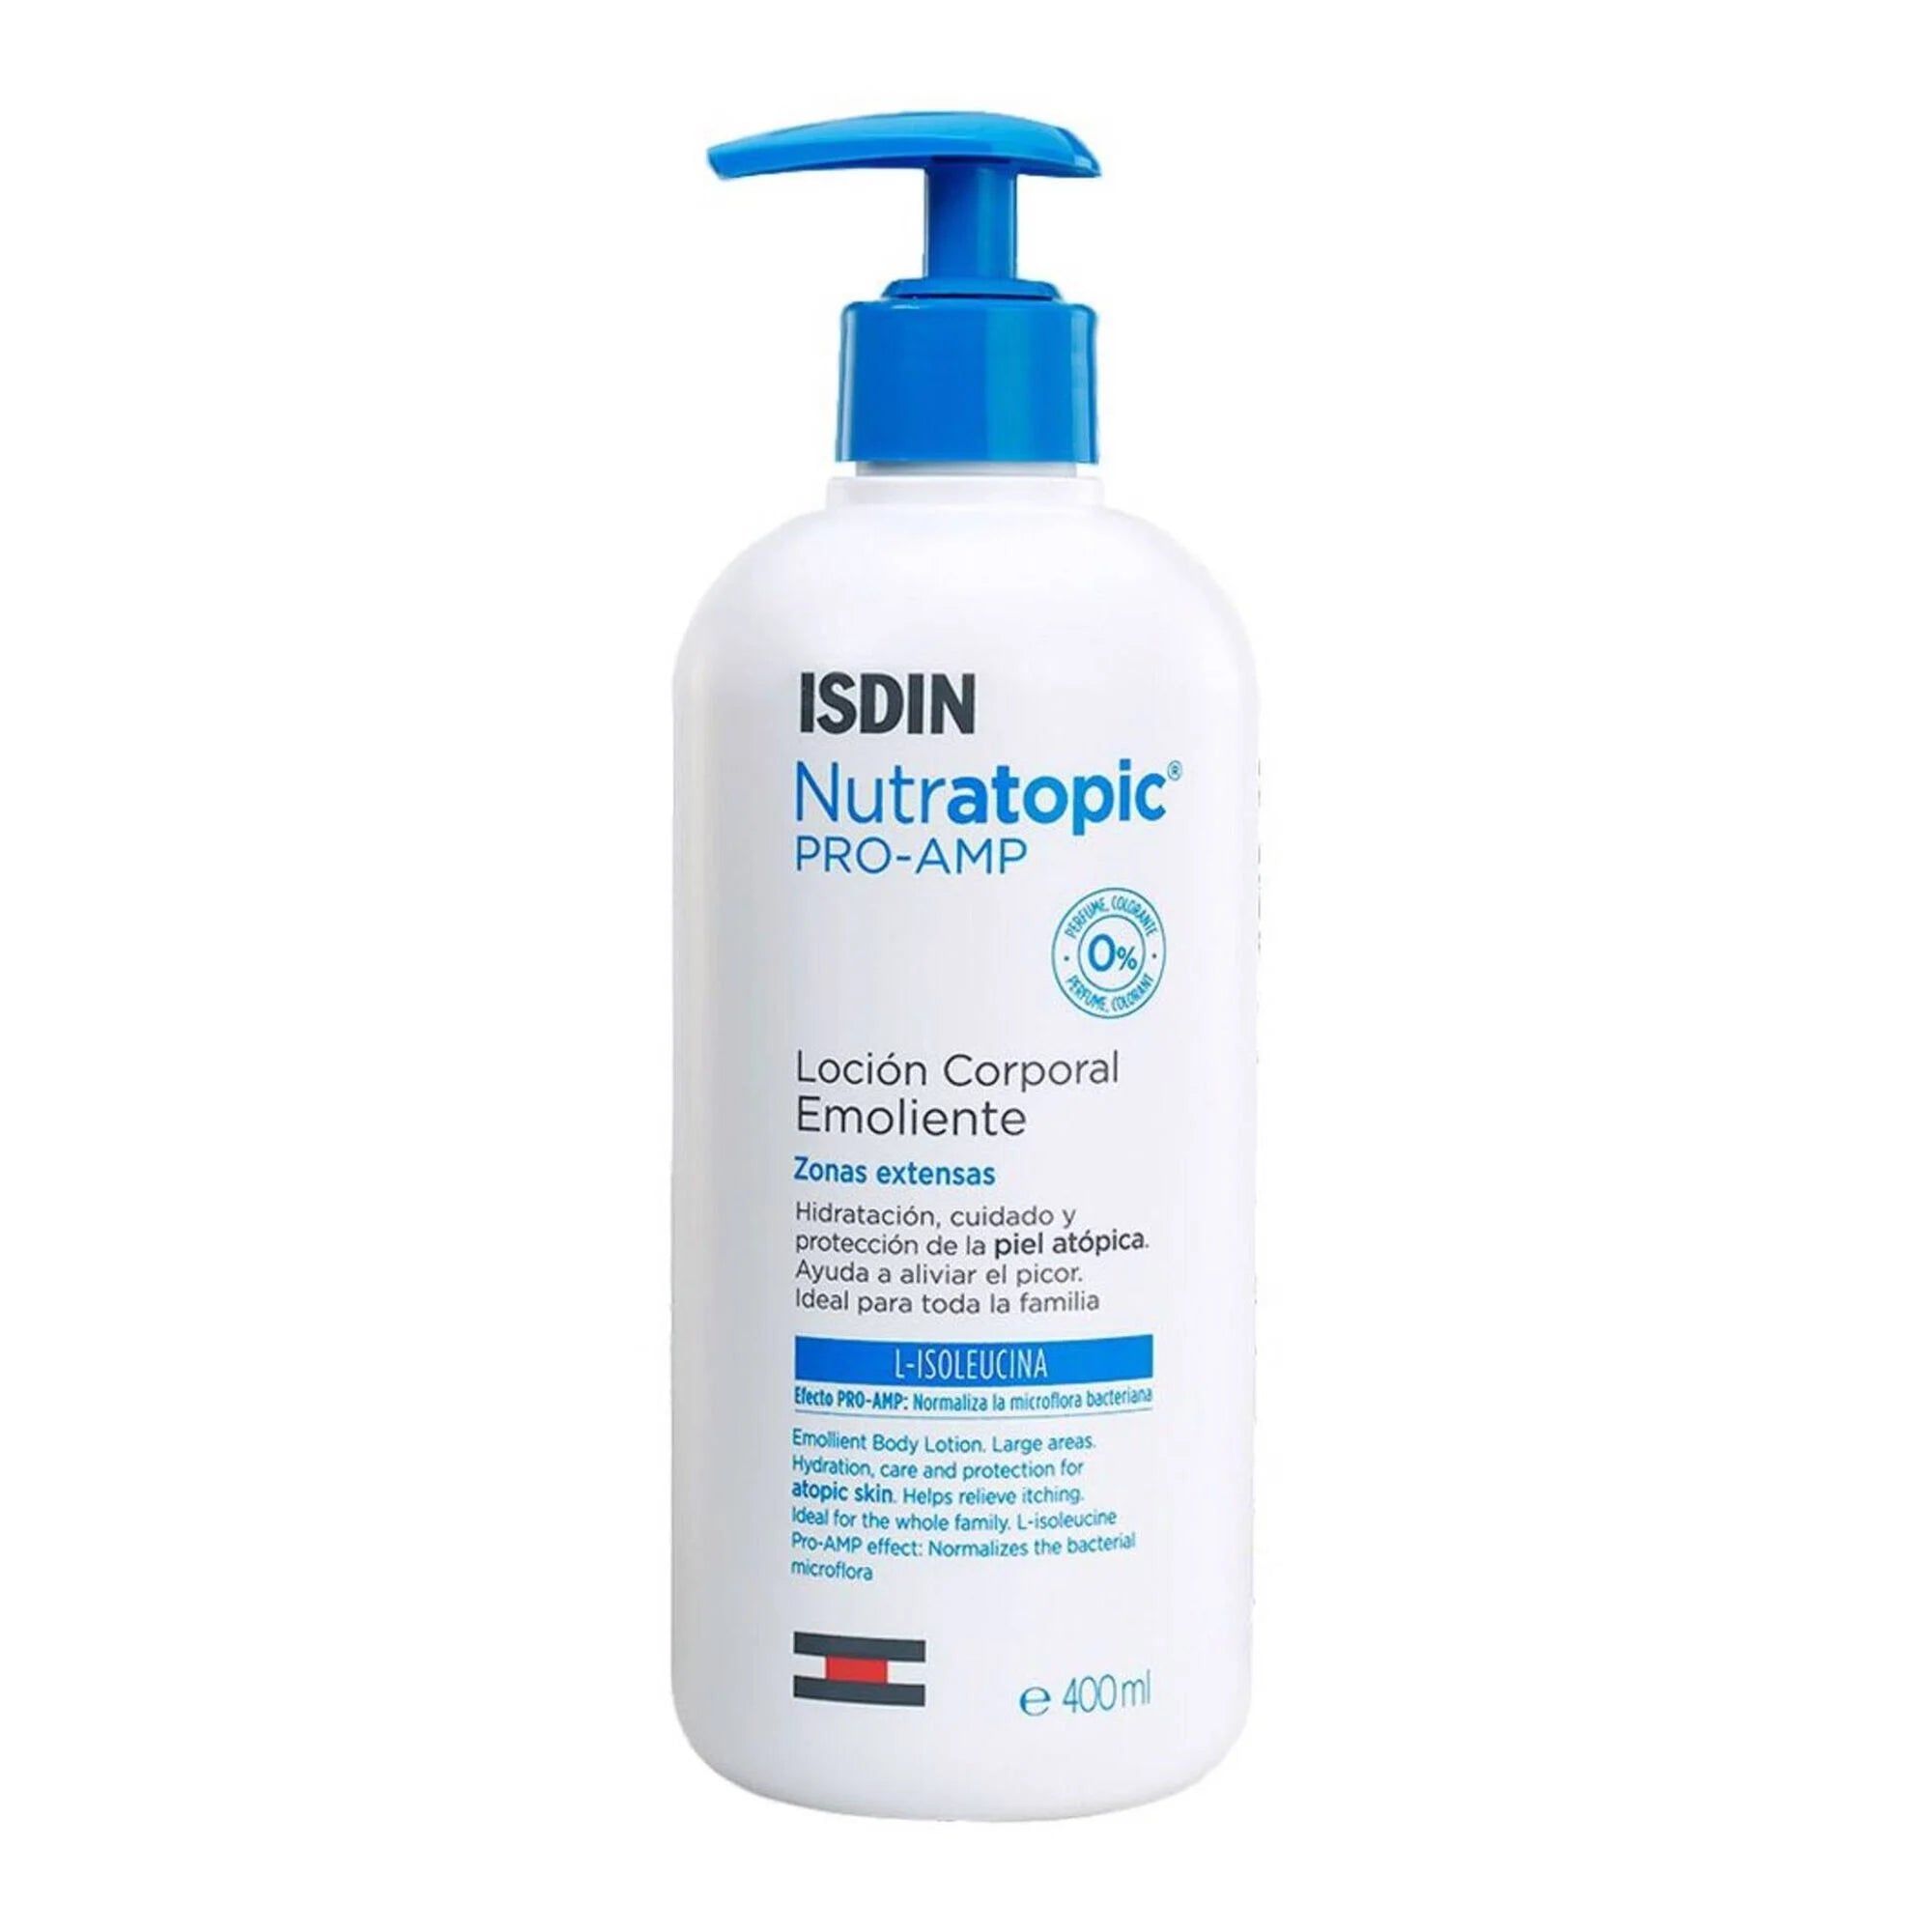 ISDIN Nutratopic Pro-AMP Emollient Lotion 400ml